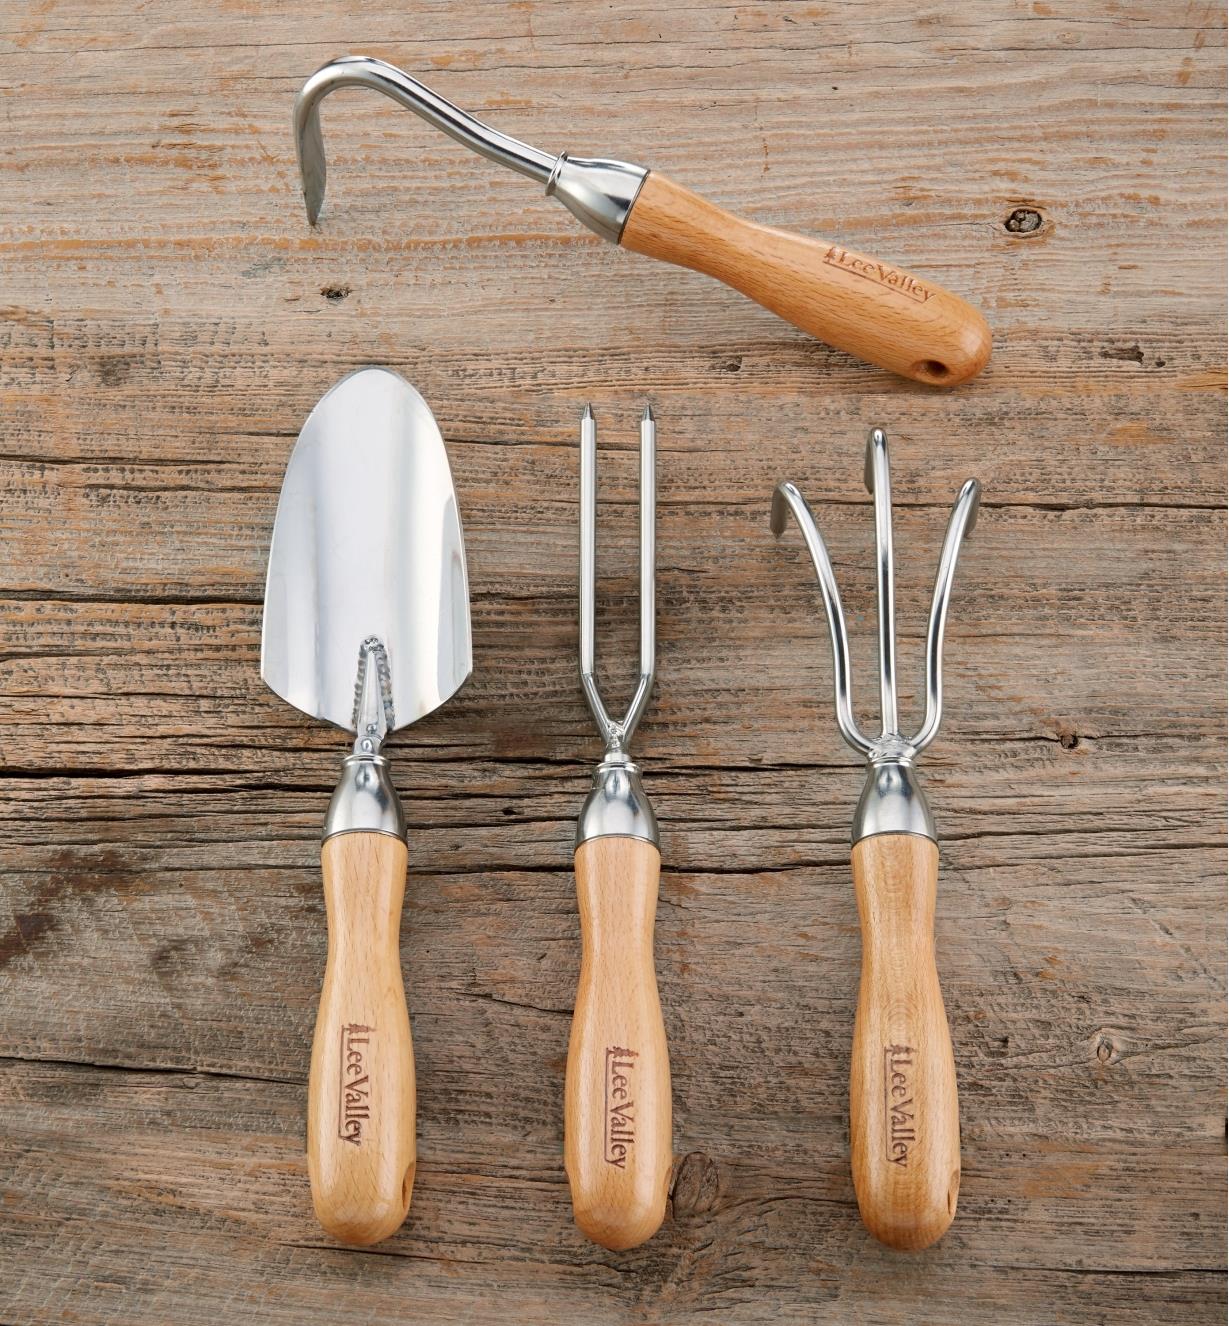 AB631 - Set of 4 Lee Valley Garden Tools